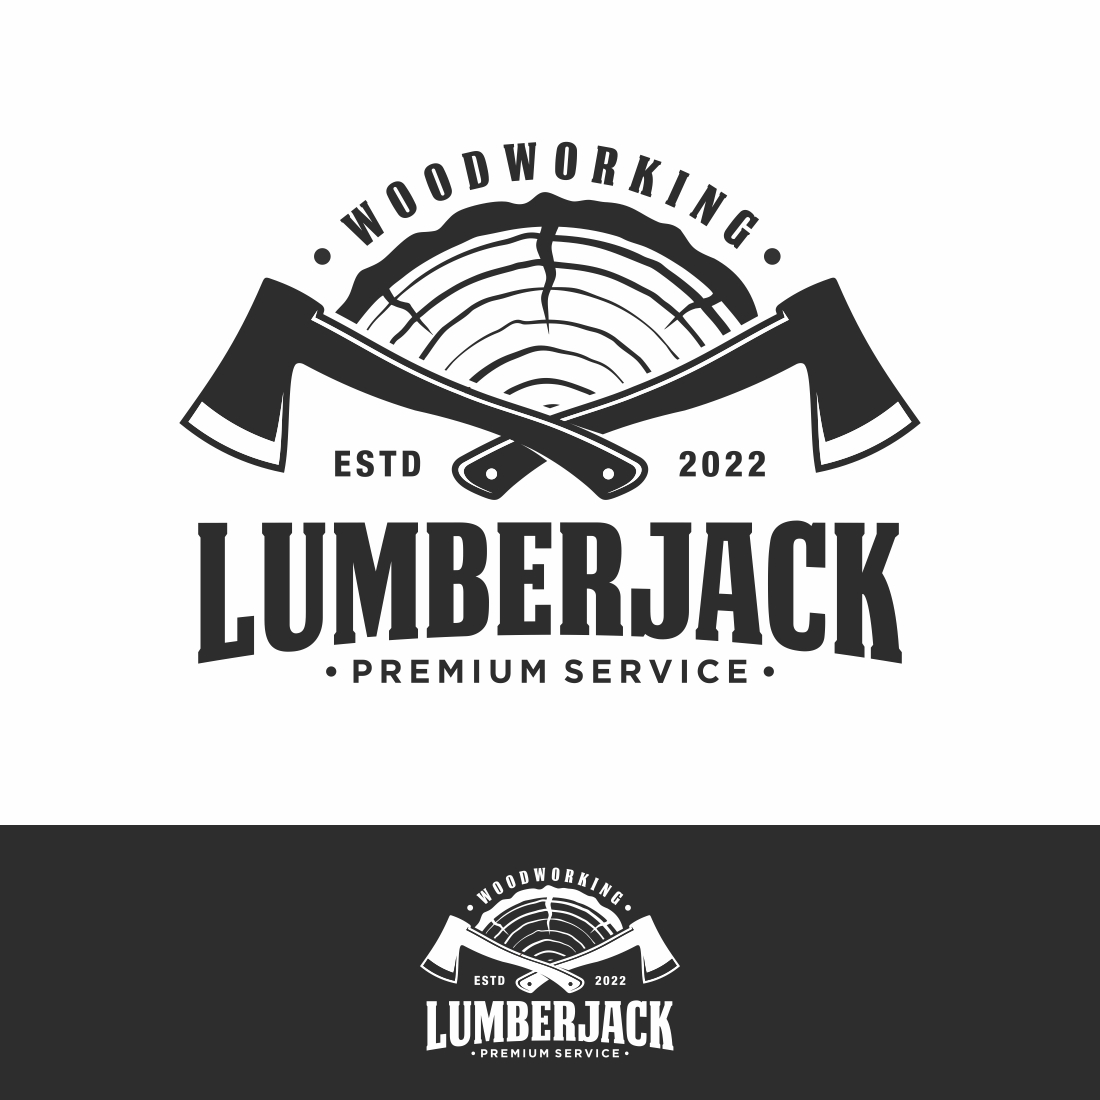 woodcutter logo design, badge, label or logo in vintage style – Only $6 cover image.